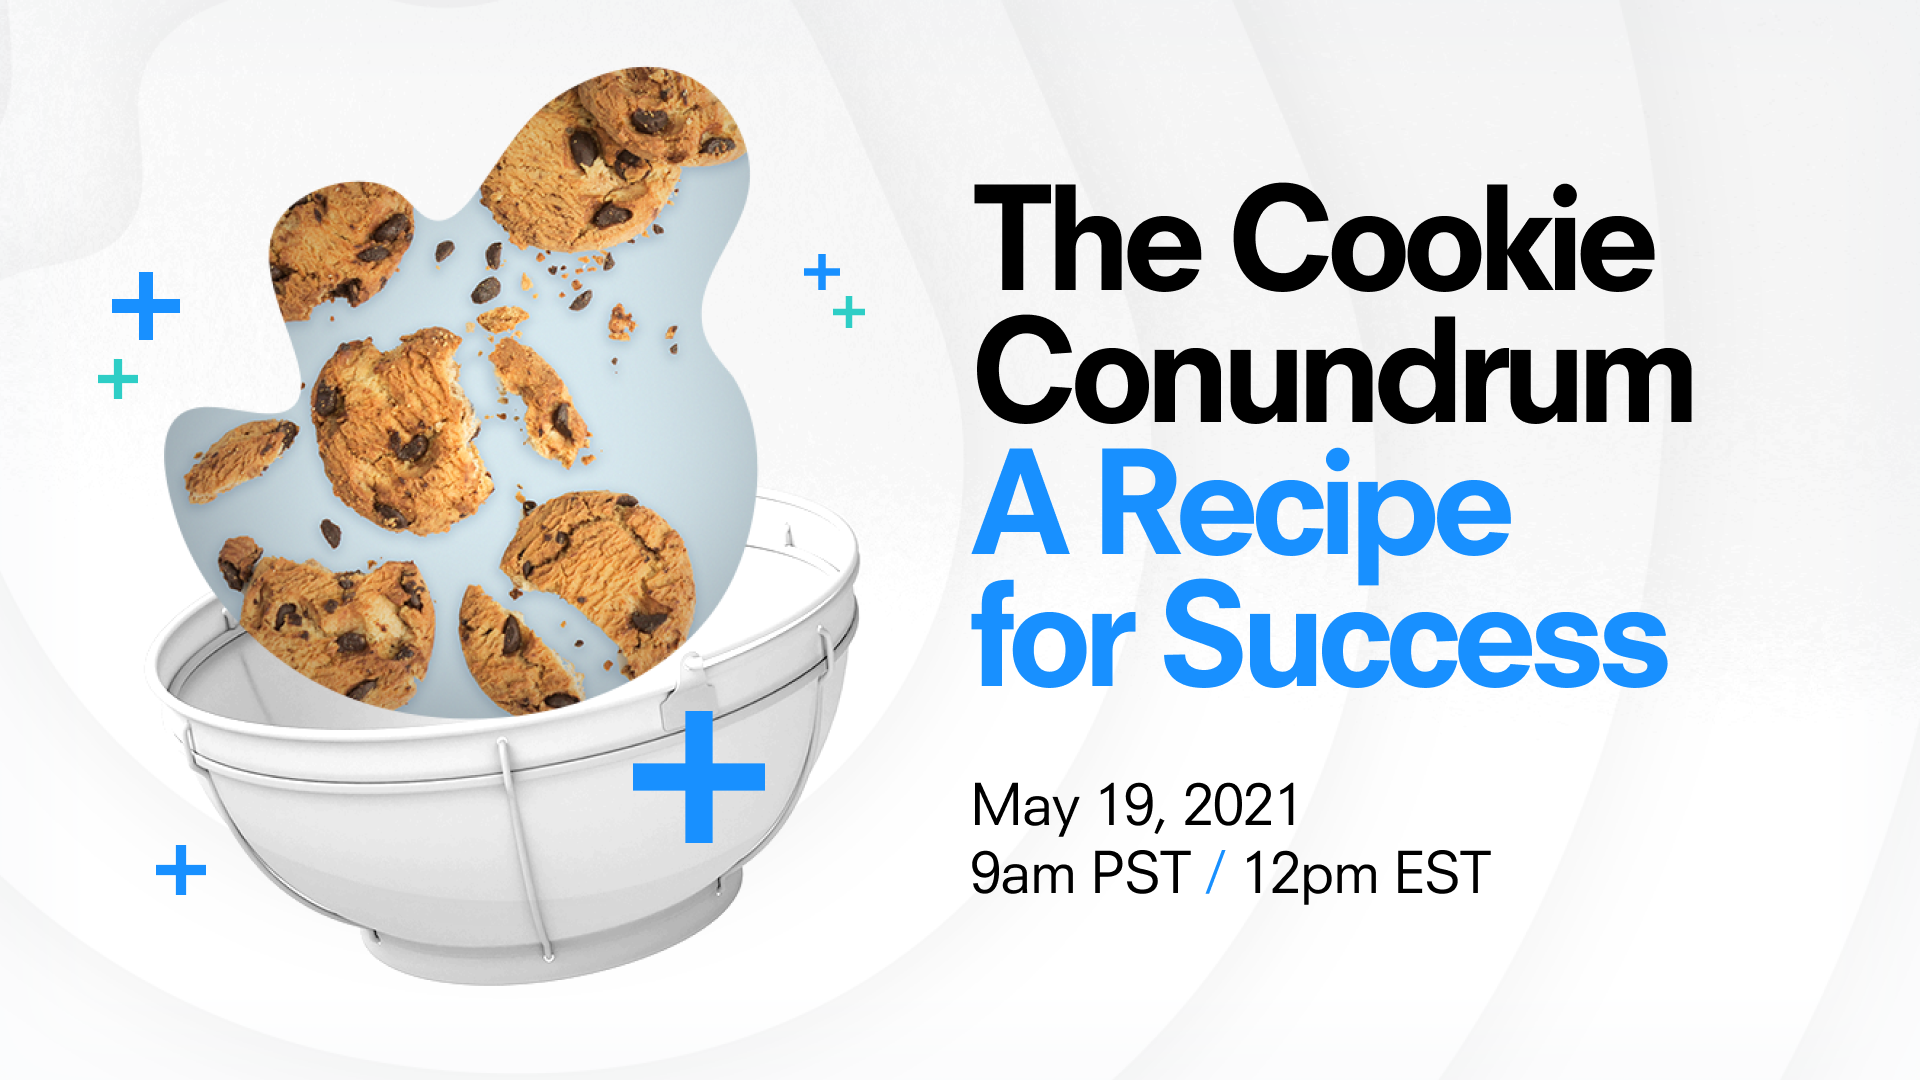 Future of advertising on open internet central topic for 'The Cookie Conundrum' event on May 19